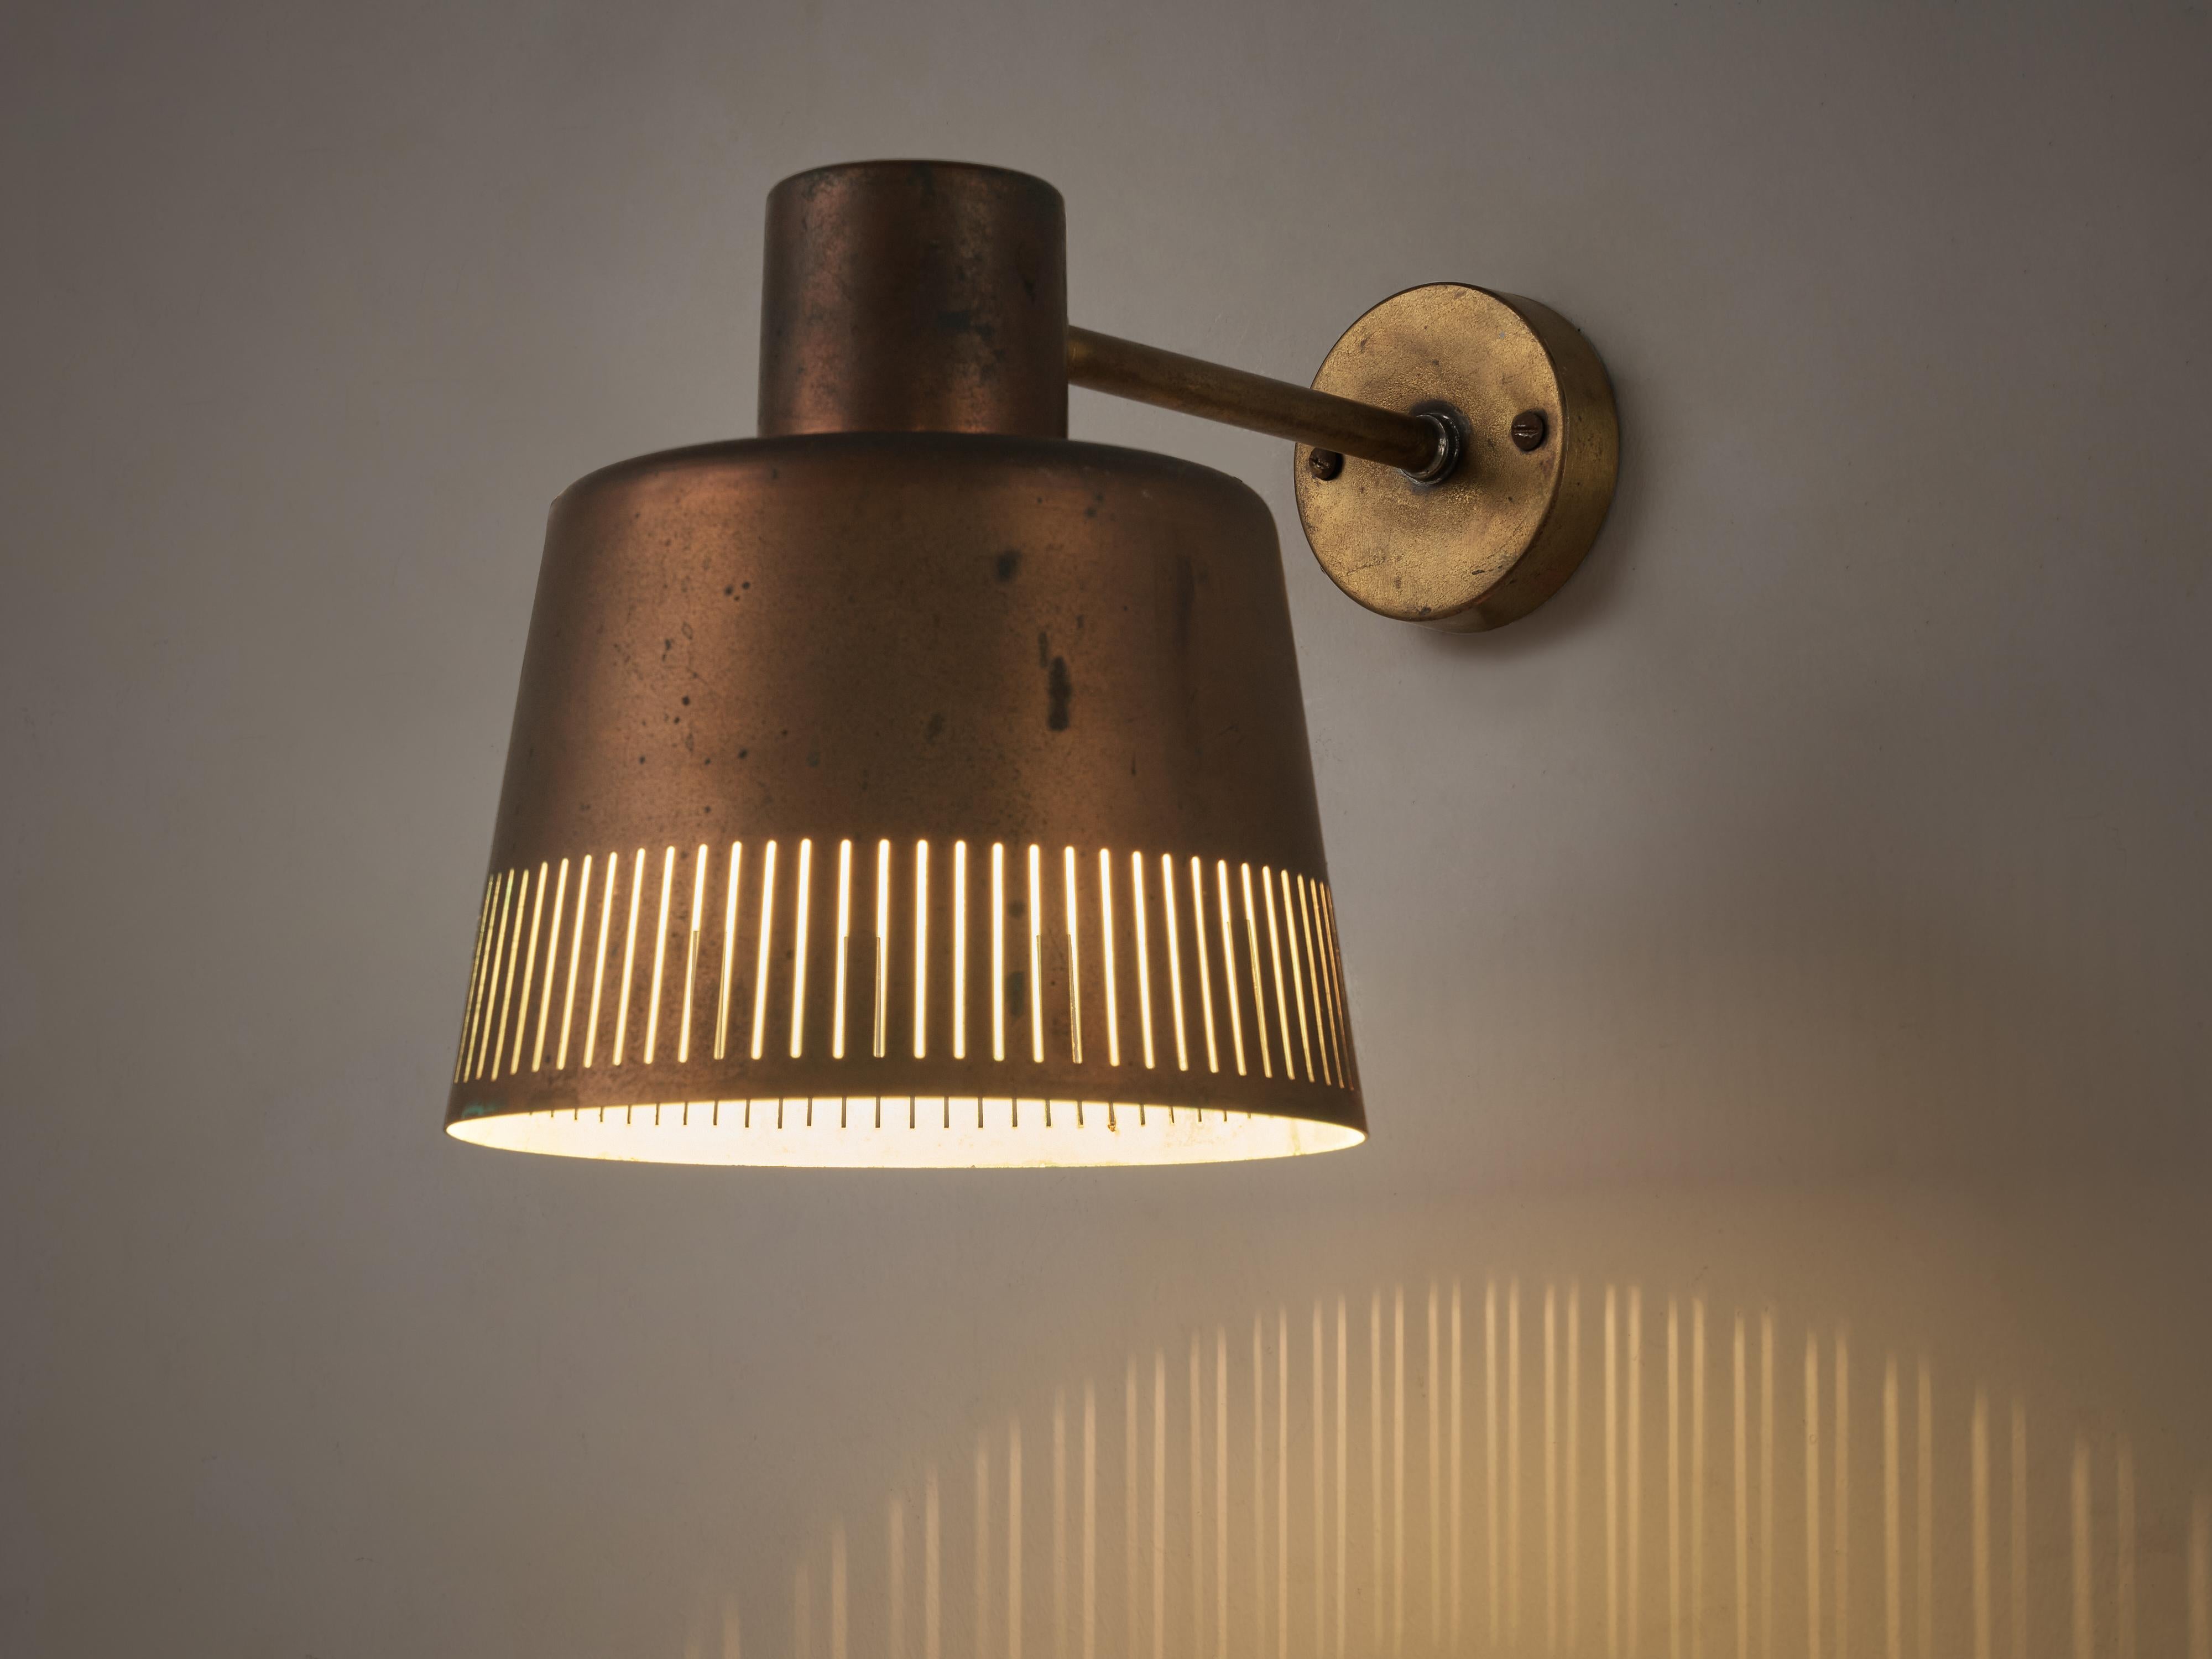 Hans Bergström for Ateljé Lyktan, wall lamp model 1006A, copper, Sweden, 1940s

Swedish designer Hans Bergström designed these wall light in the 1940s. As a material Bergström chose copper that got some patina over time. The shade of the wall lamps